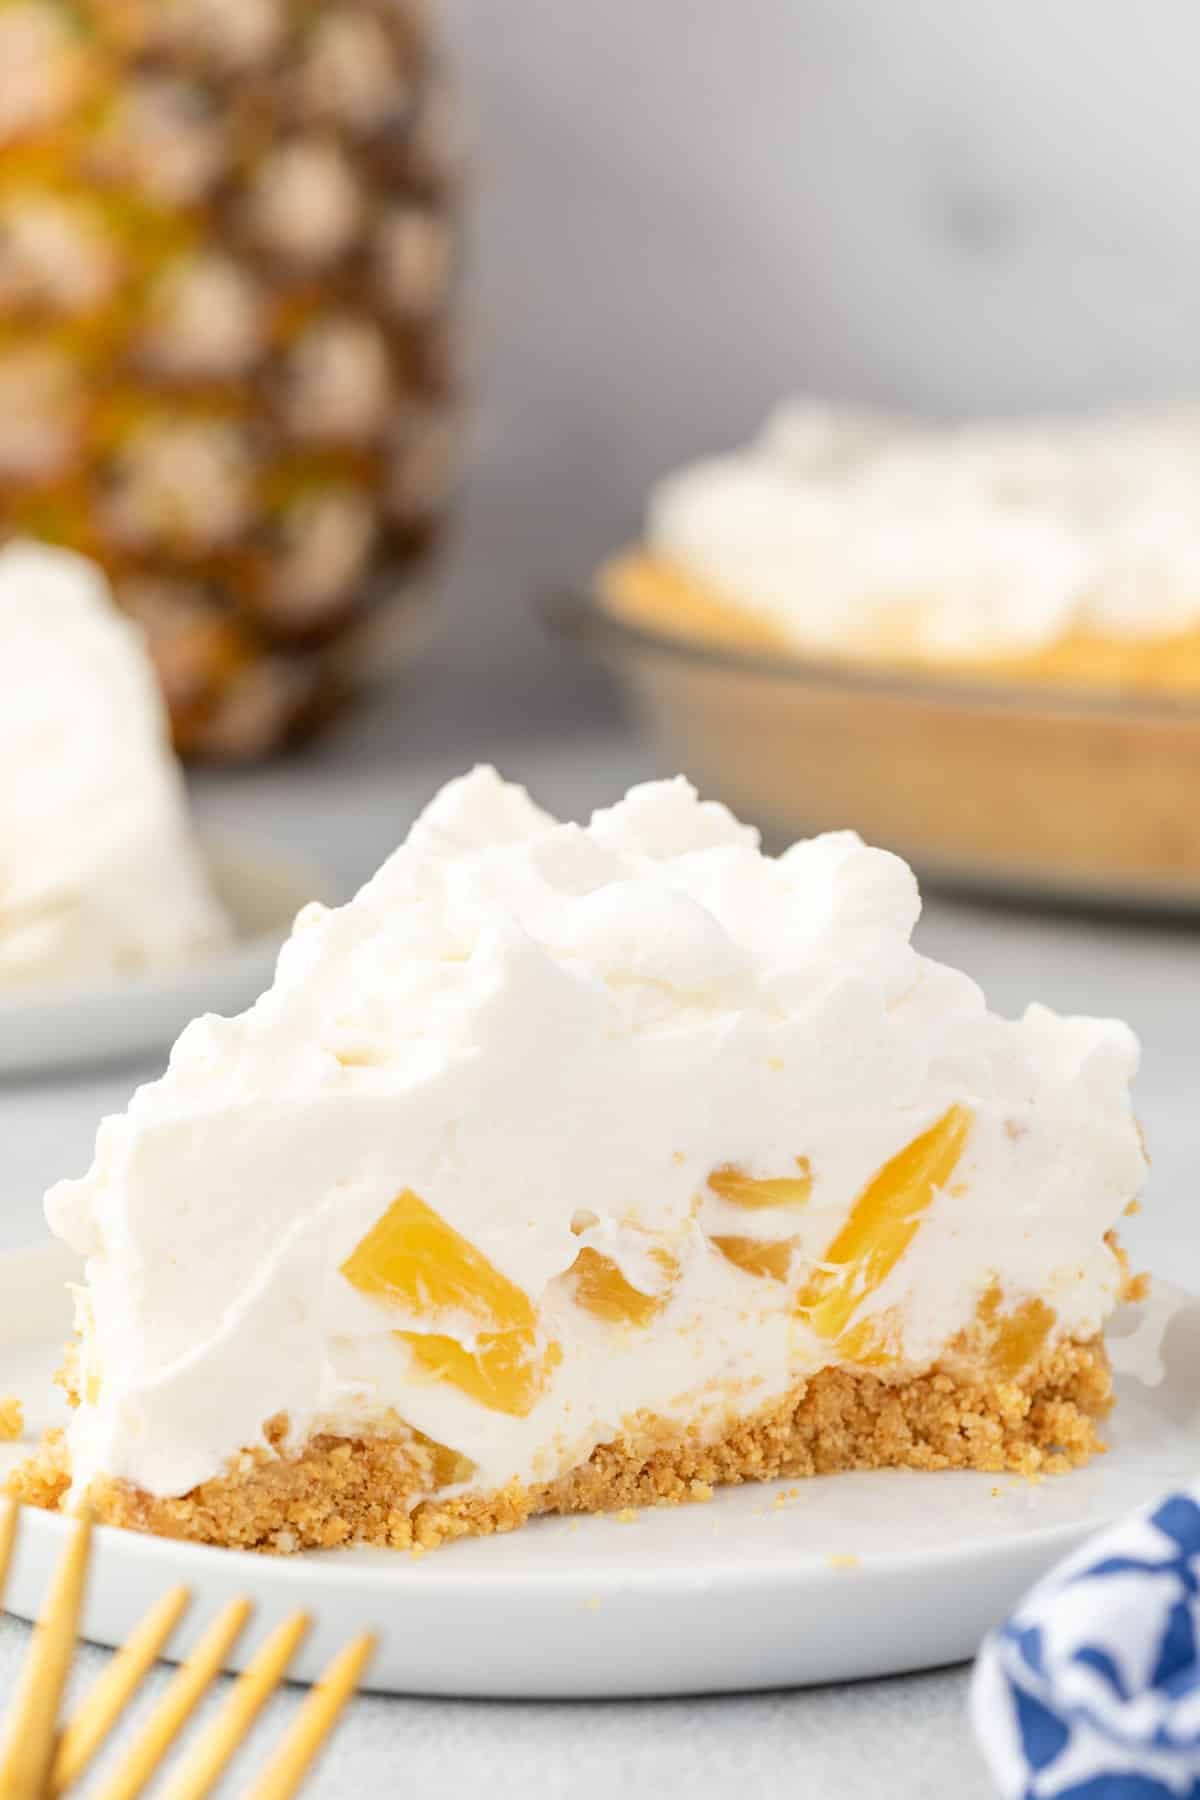 A slice of pineapple cream cheese pie on a plate with a pineapple and the pie in the background.